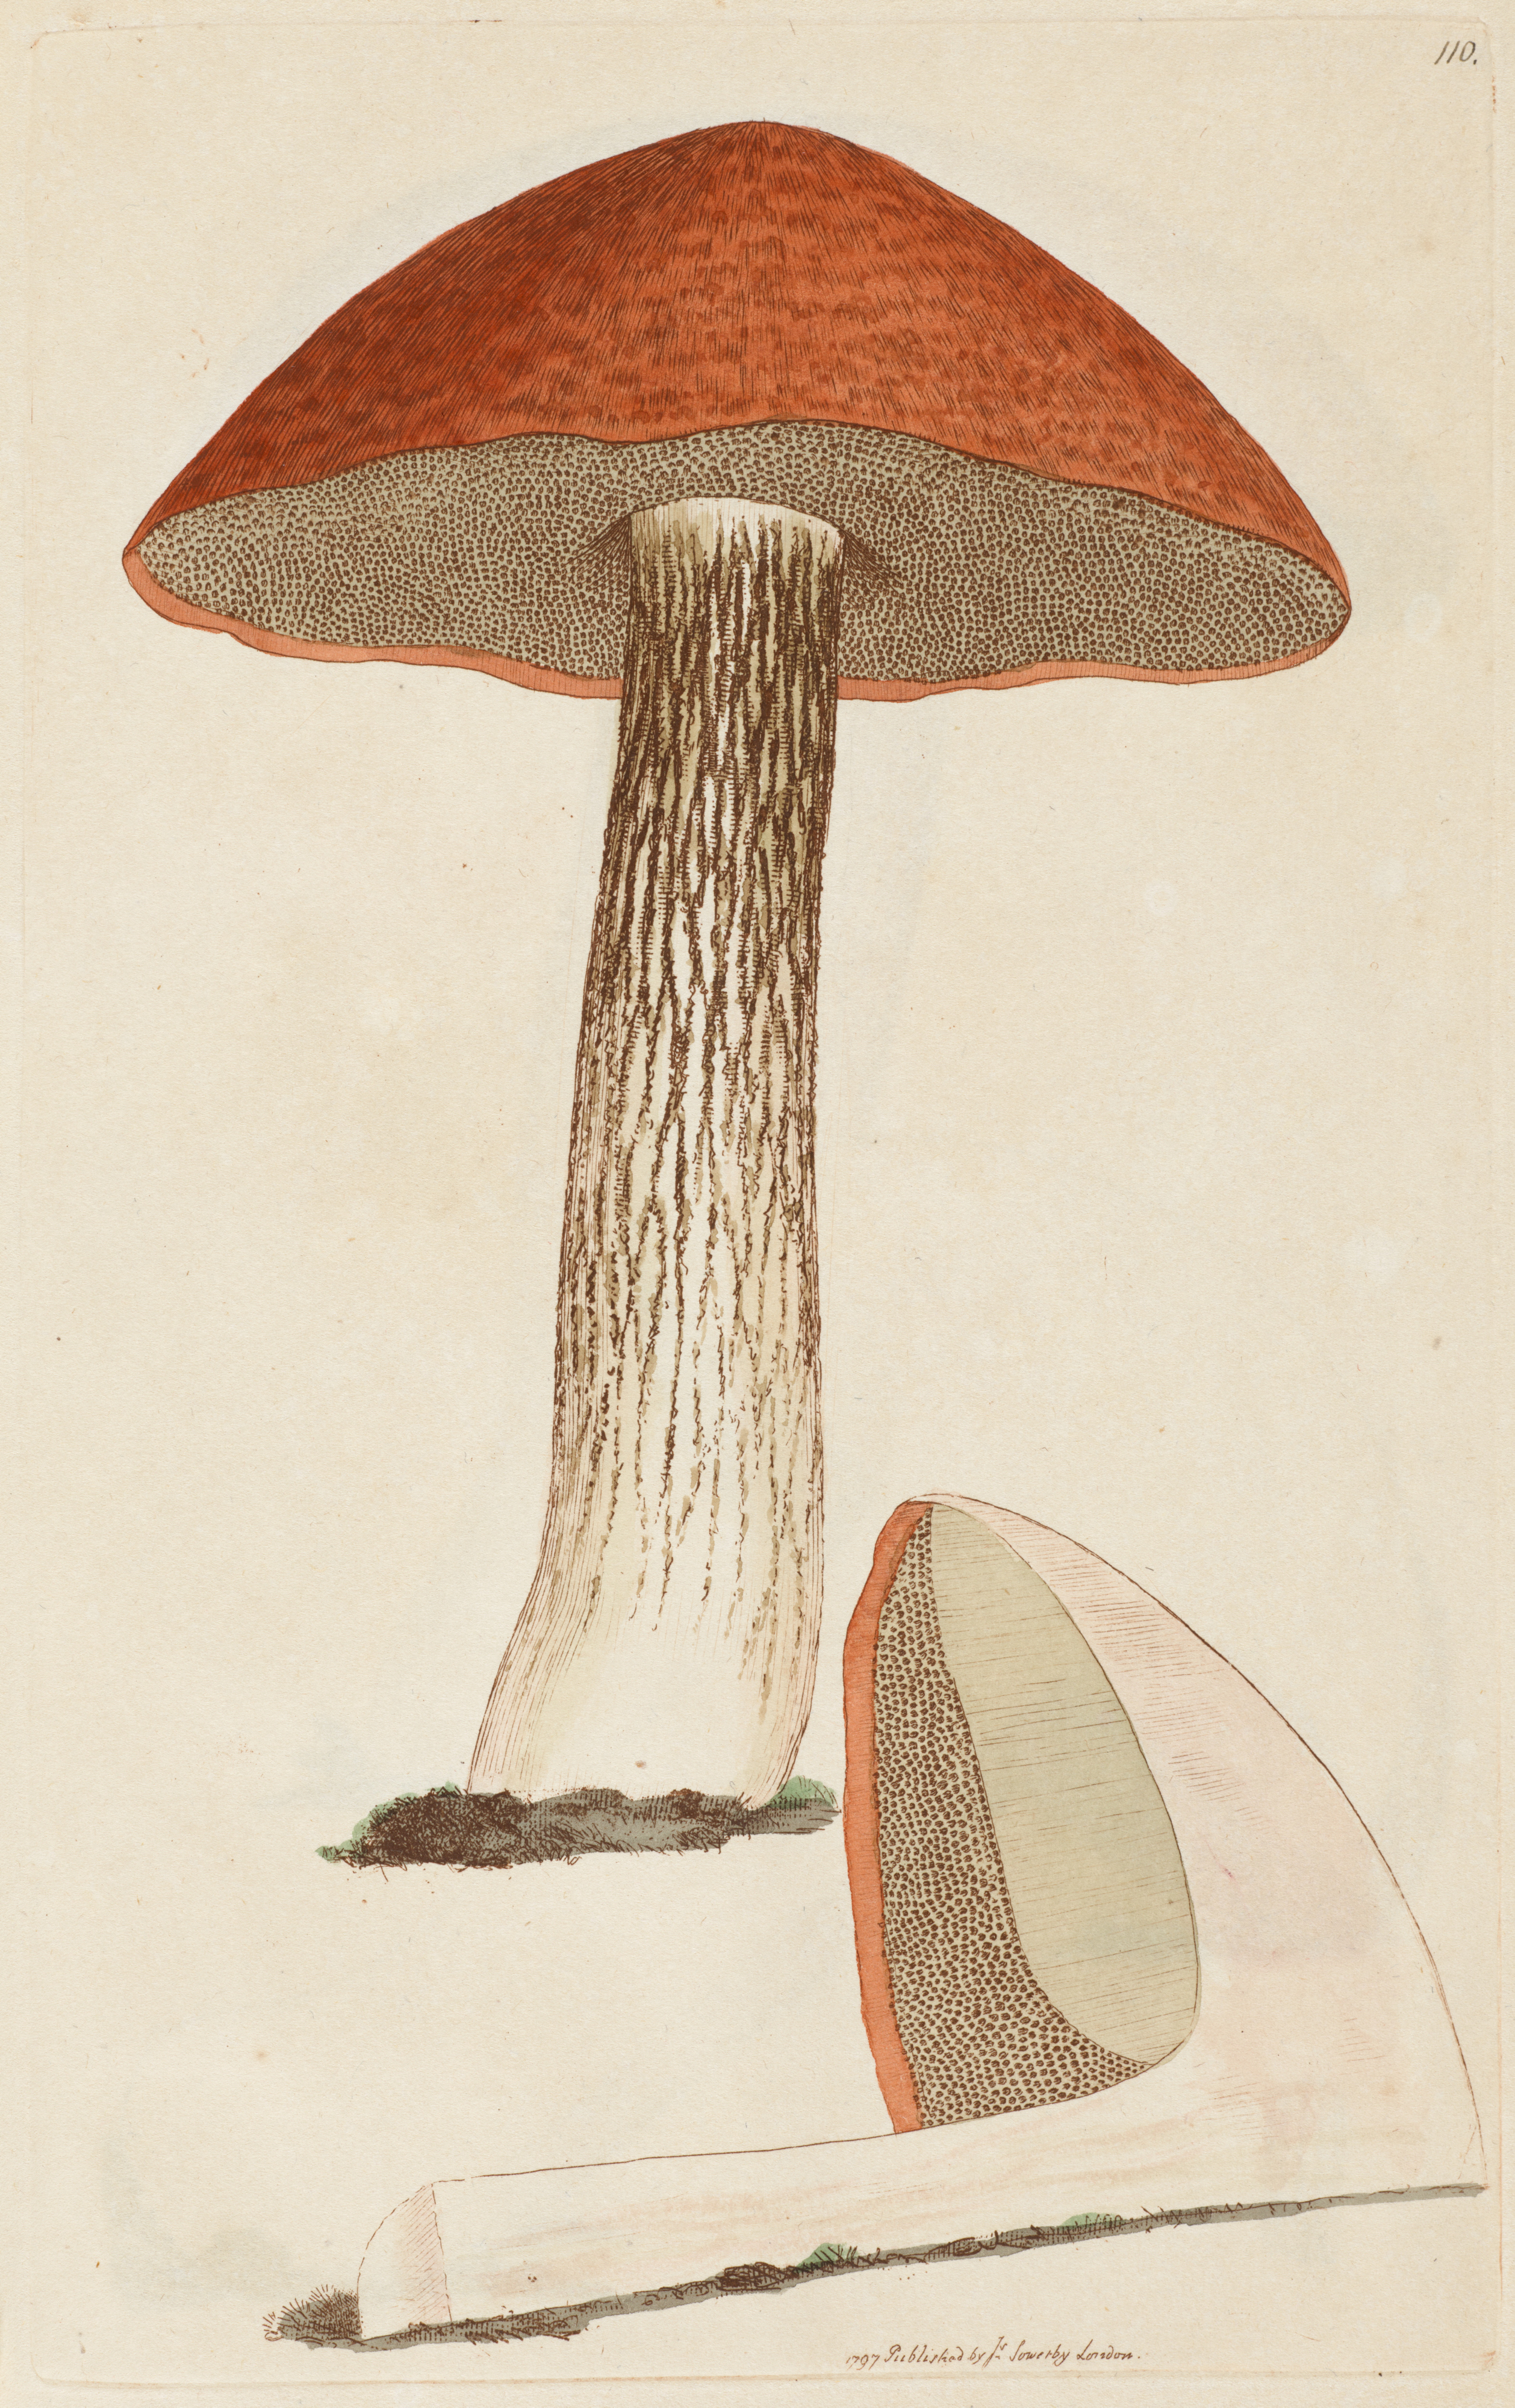 Drawing of a red capped mushroom